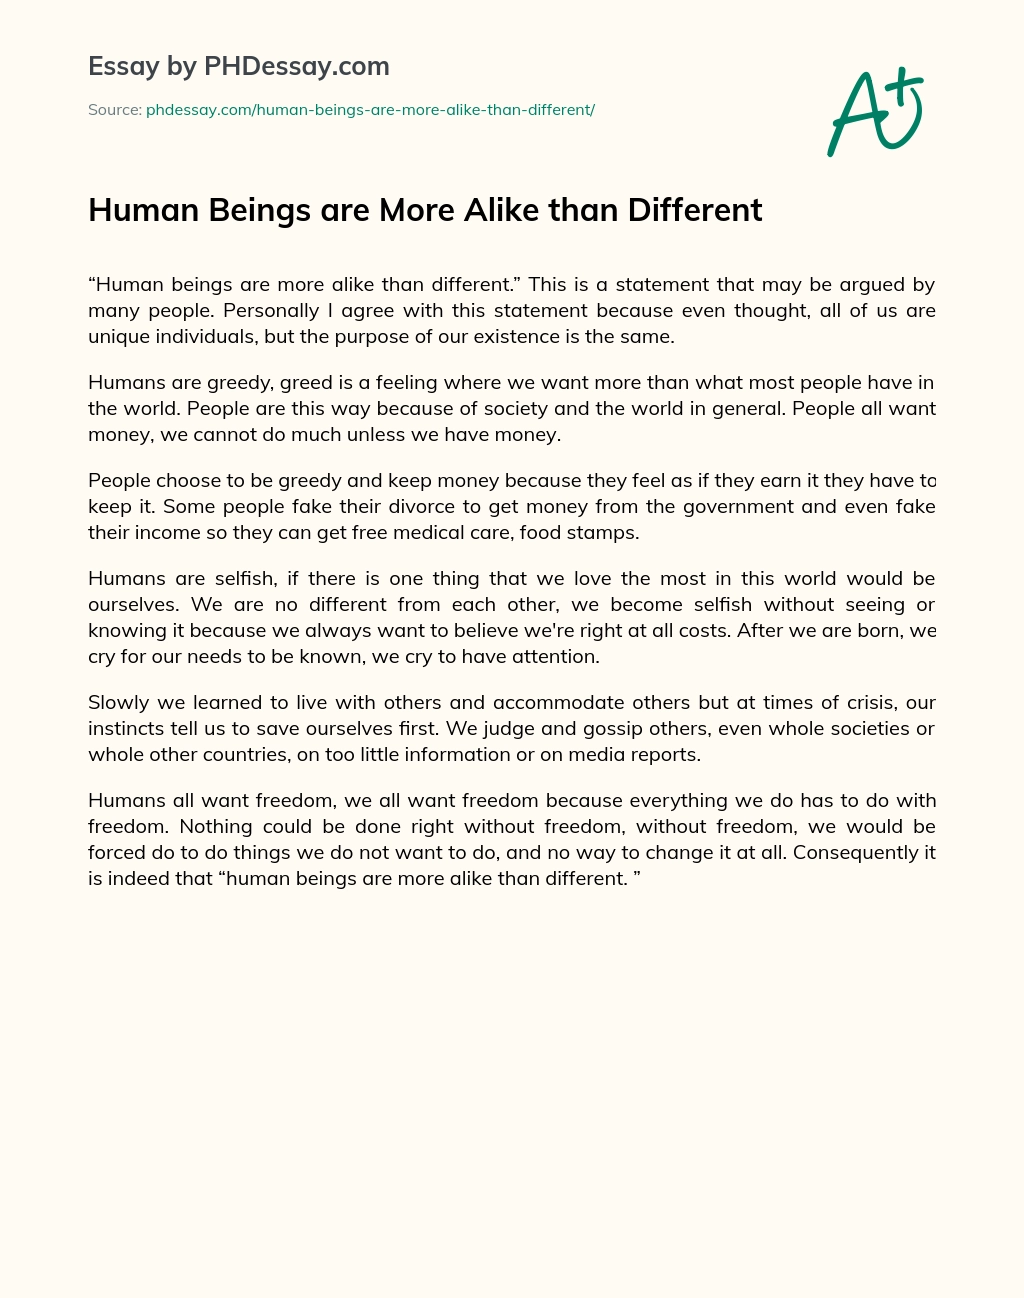 Human Beings are More Alike than Different essay